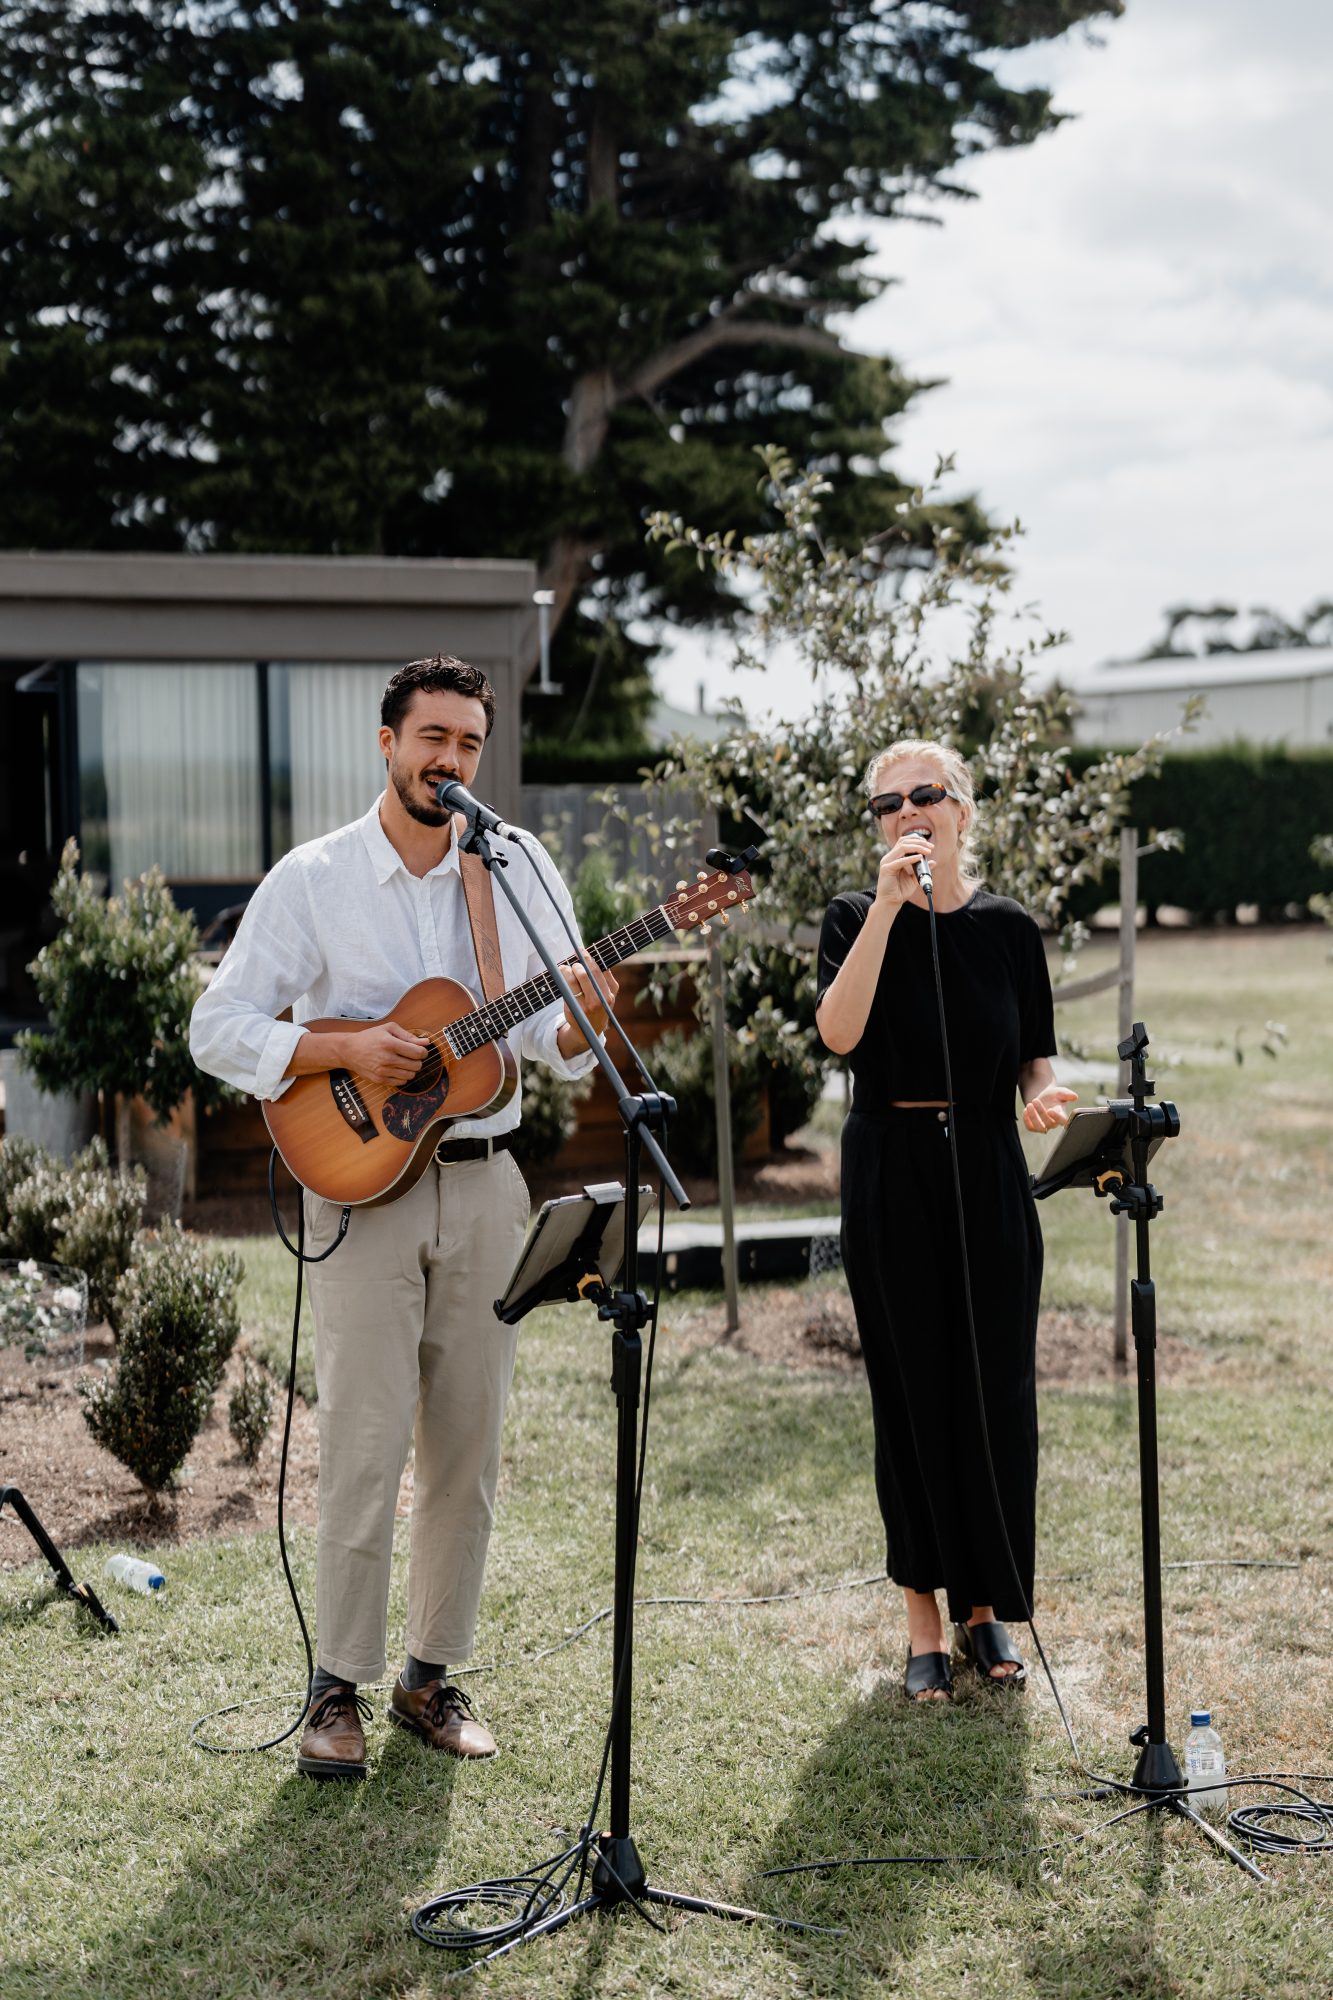 Acoustic Wedding Songs: Crafting the Perfect Playlist for Your Big Day